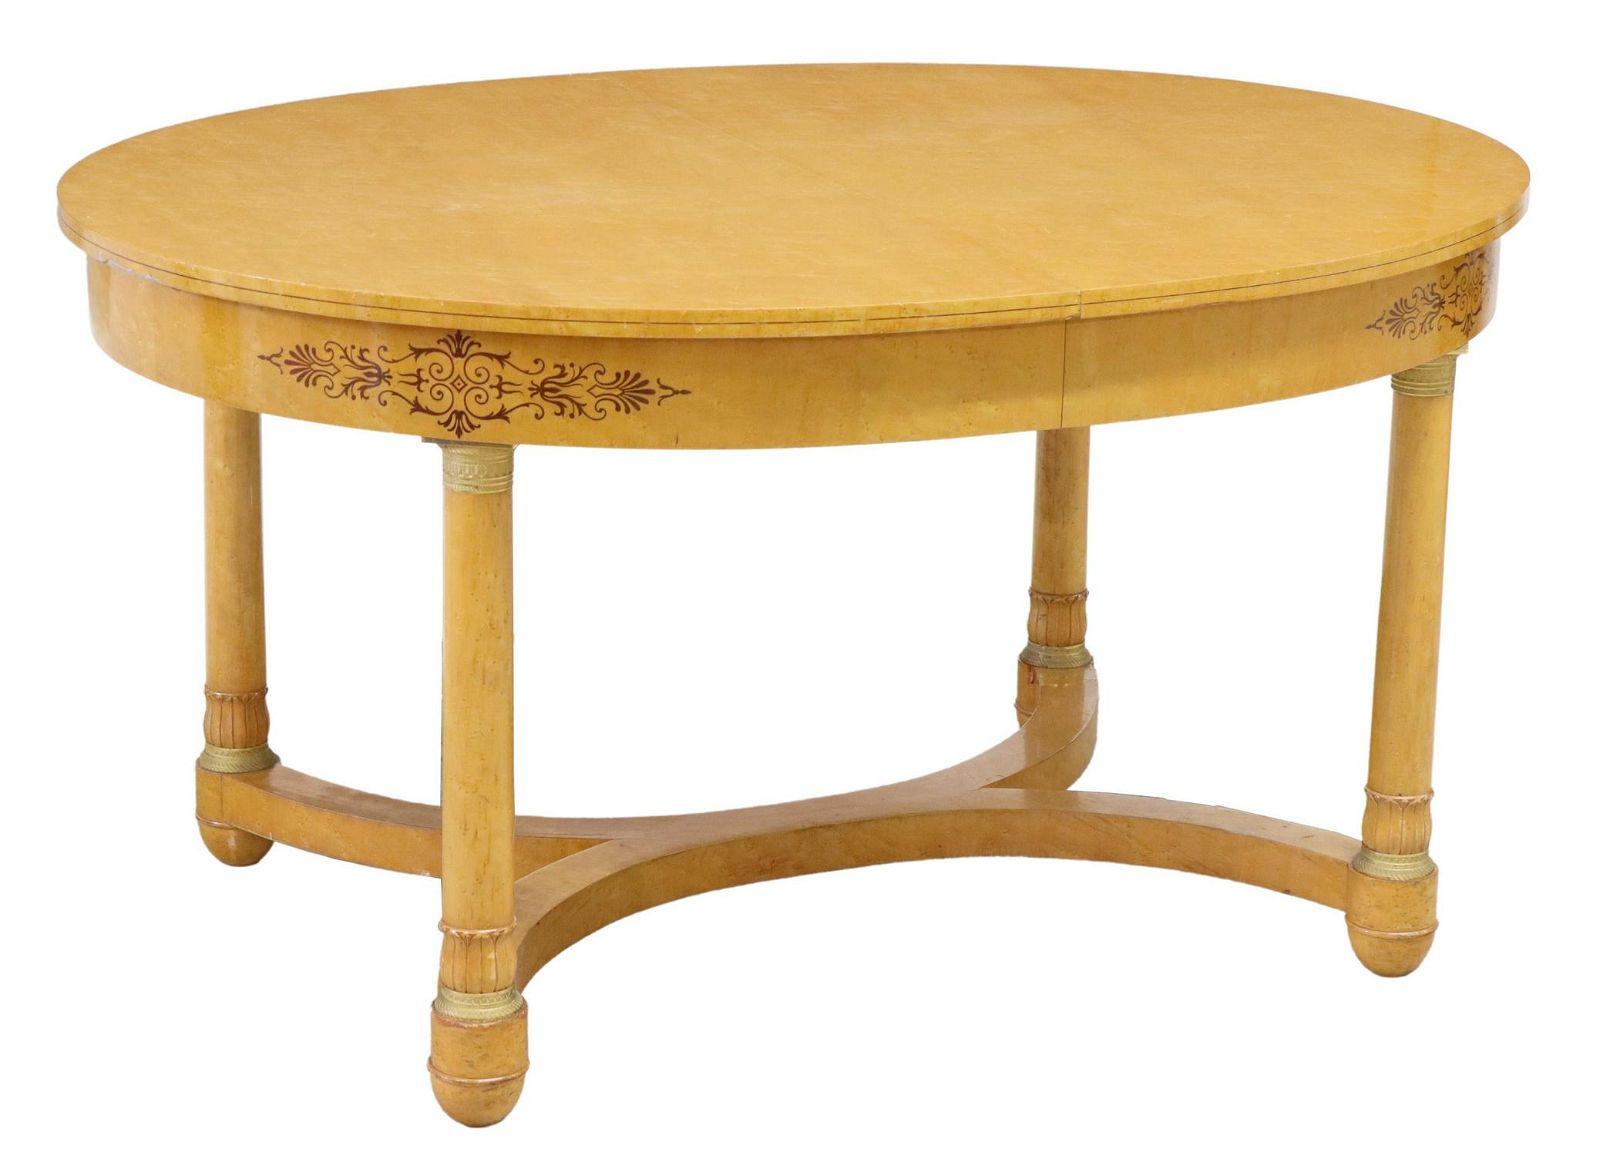 Vintage French Empire Style Extension Dining Table In Good Condition For Sale In Sheridan, CO